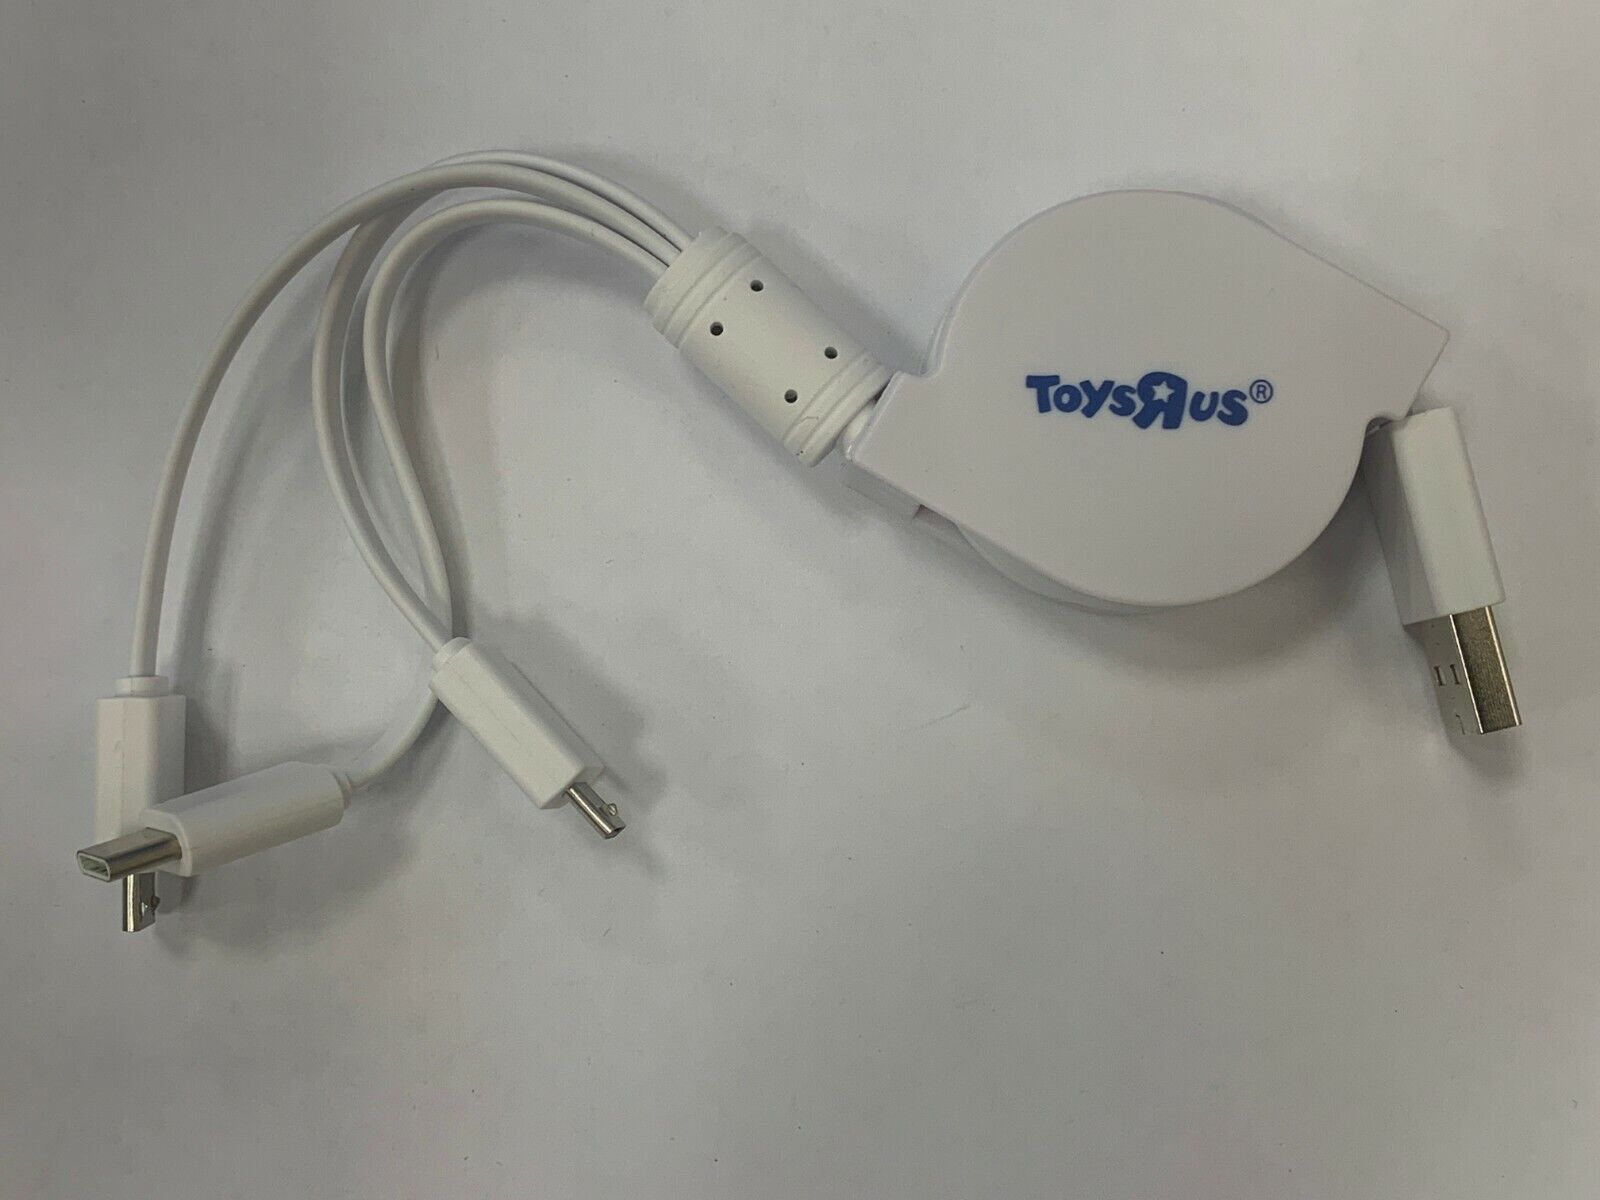 RARE Toys R Us Retractable USB Charging Cable with 2 Micro USB and 1 USB C Plugs